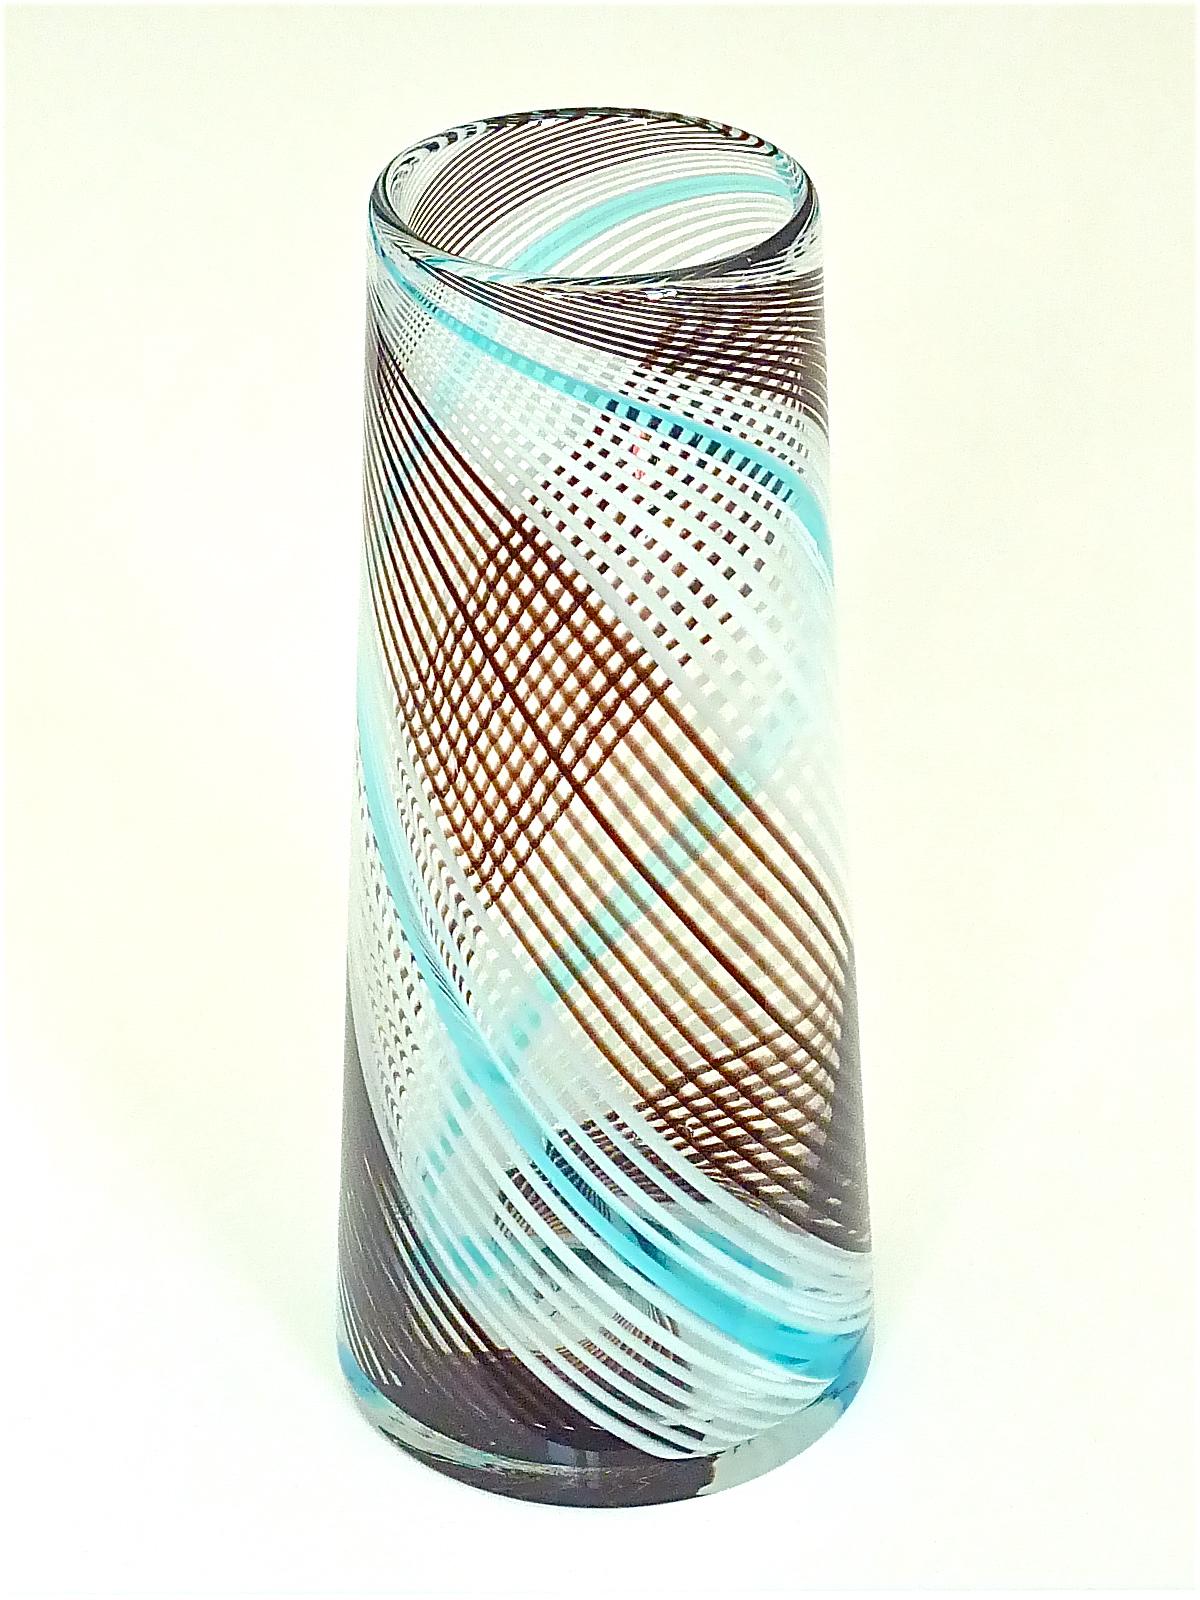 Large Murano Glass Vase Dino Martens Aureliano Toso Style White Blue 1950s 60s  For Sale 5